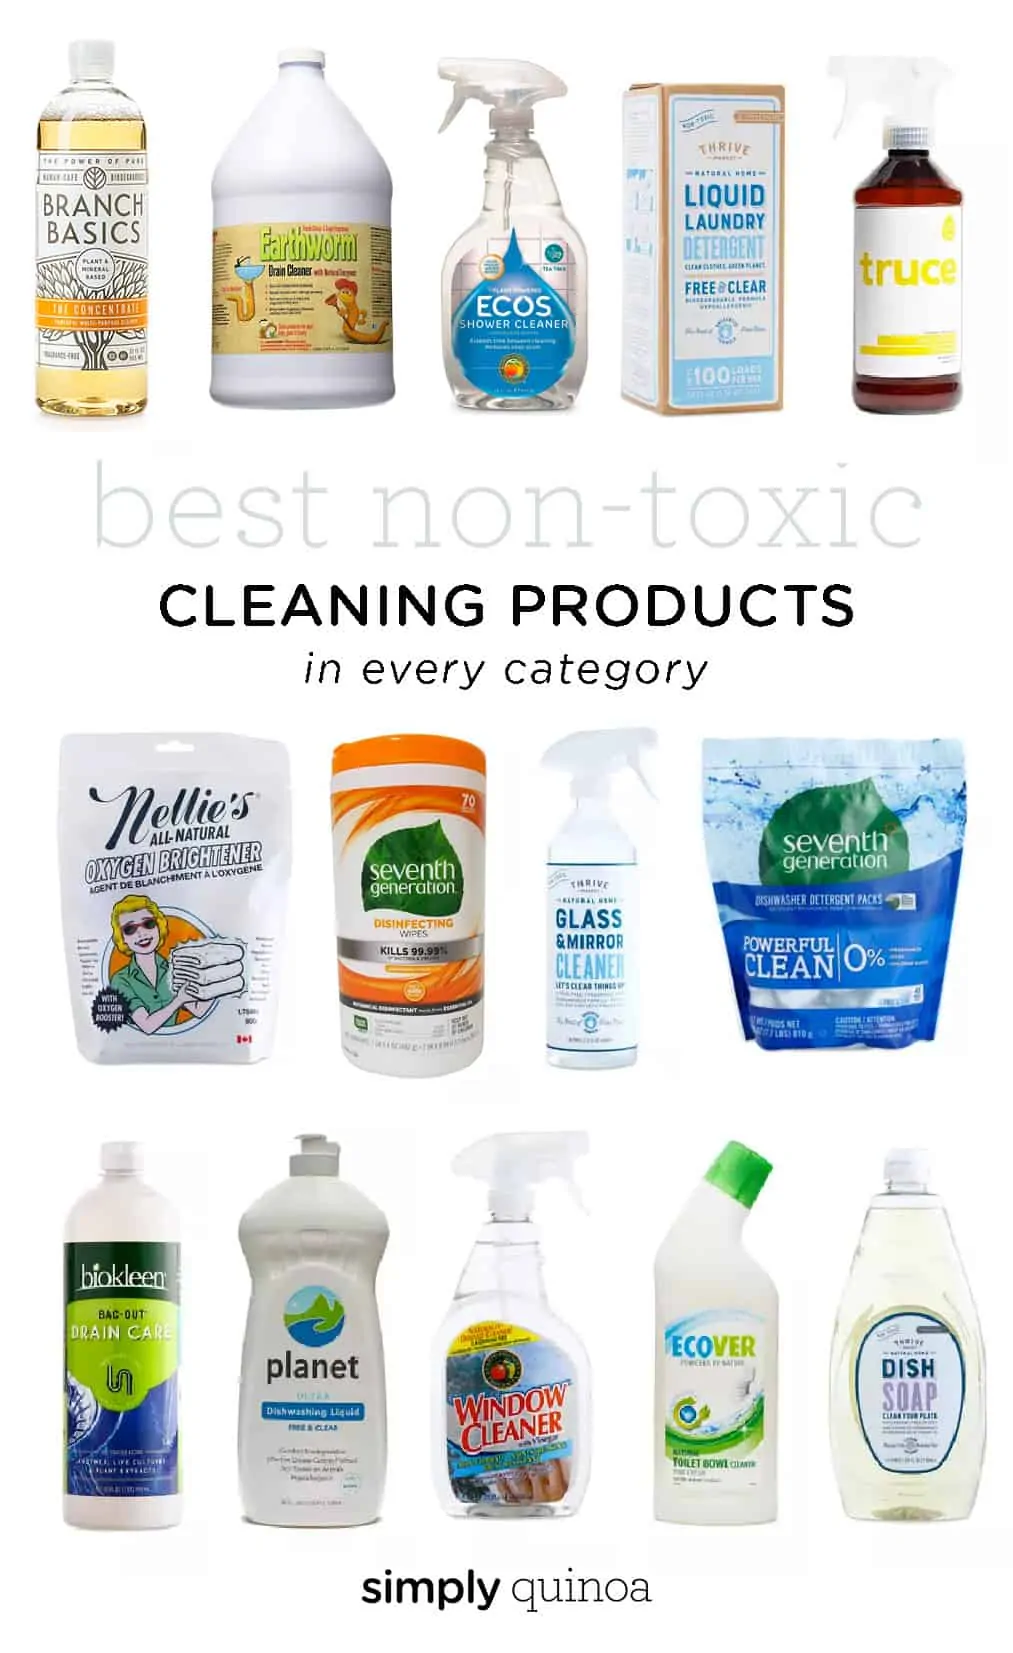 Best Non-Toxic Cleaning Products in Every Category